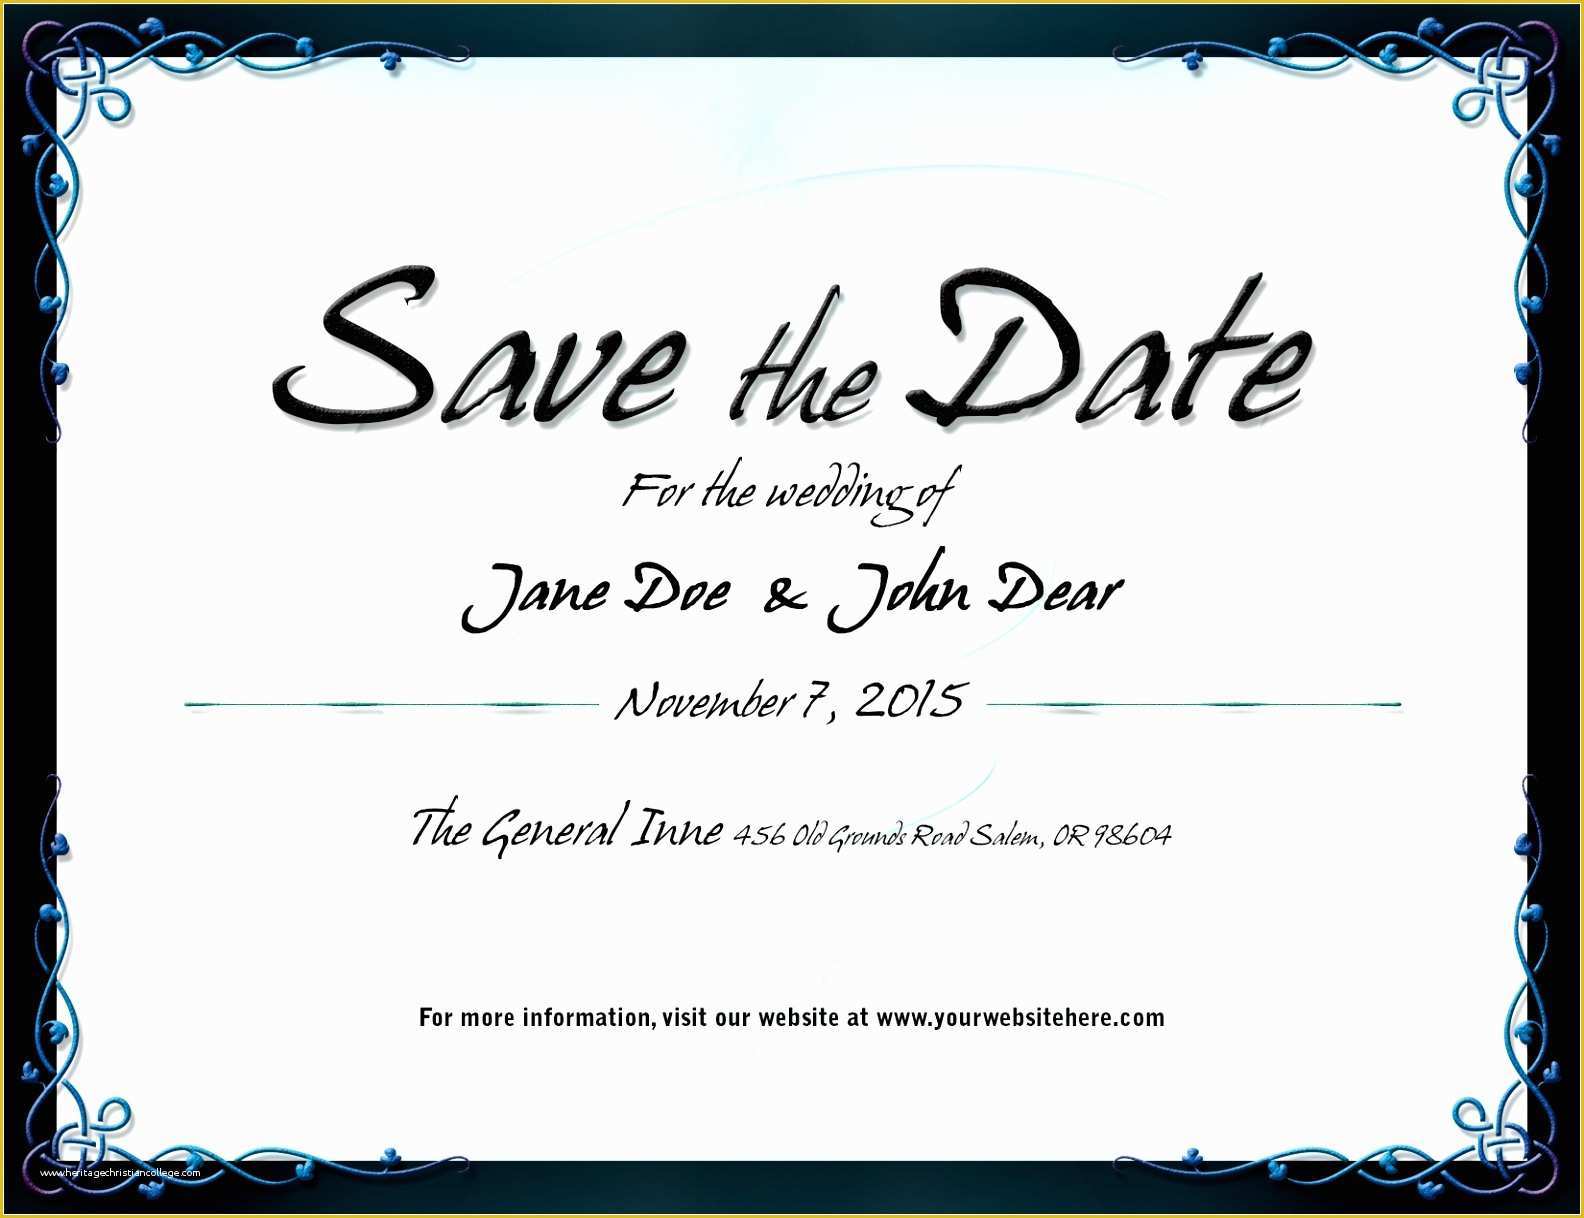 Save the Date Email Template Free Of 9 Business Save the Date Email Template Oaeup